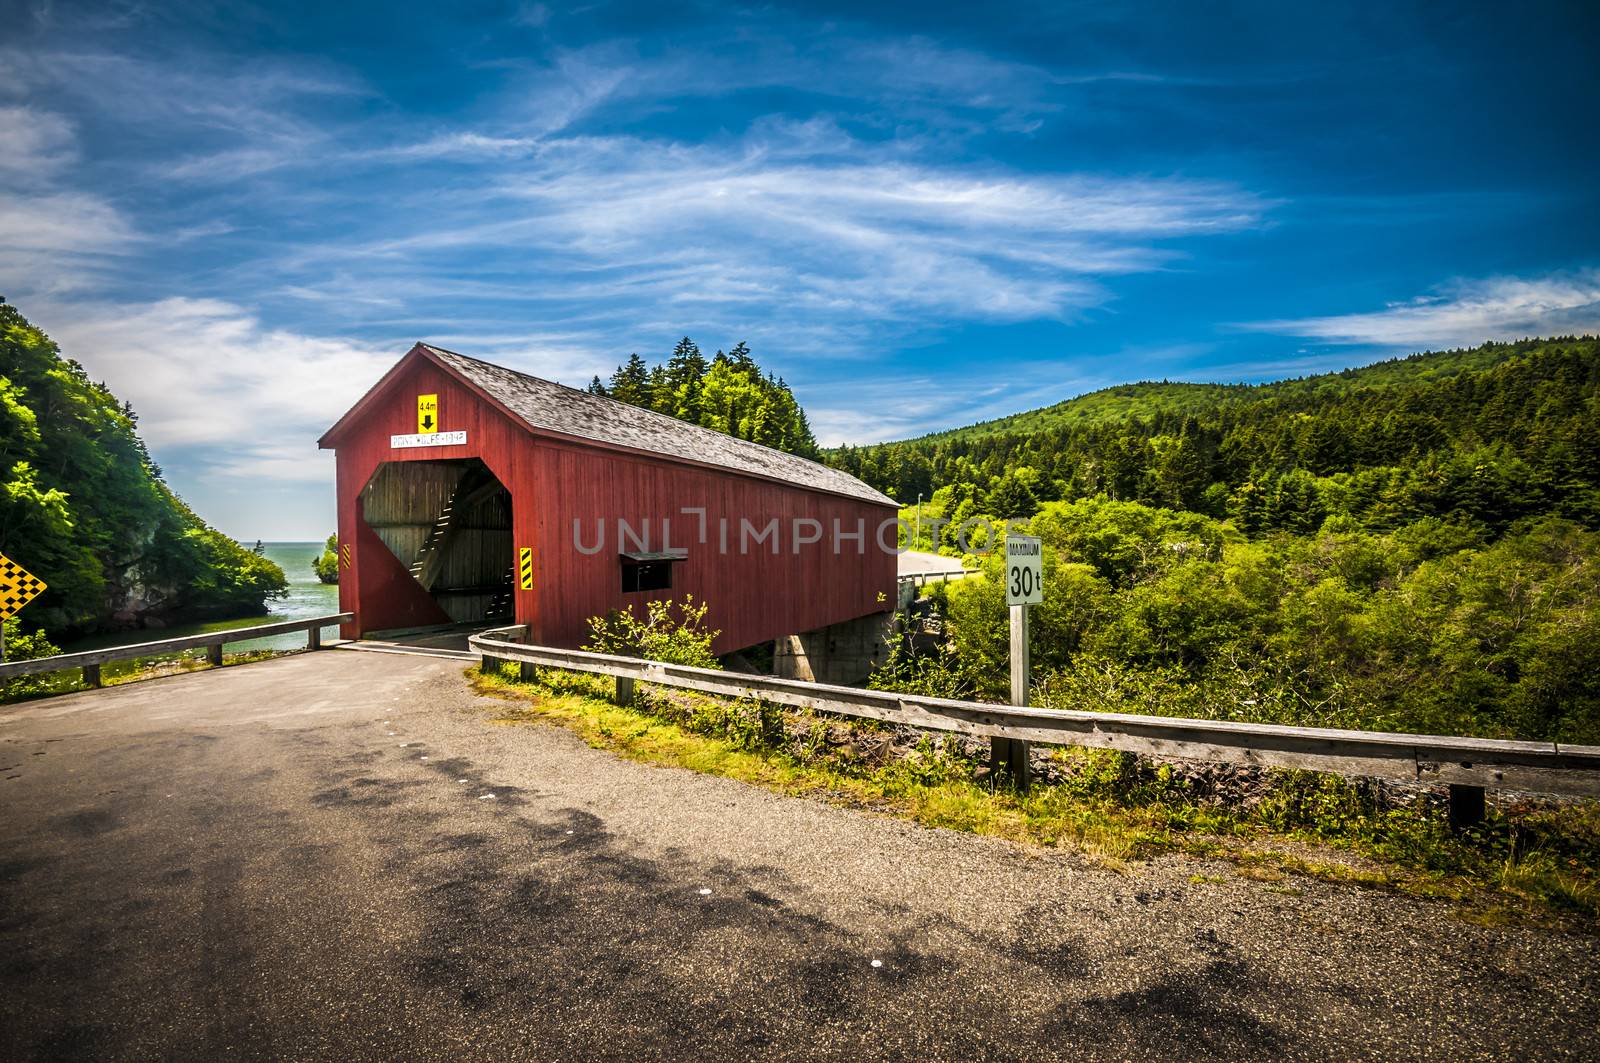 Covered bridge located in the region of Point Wolf New Brunswick Canada